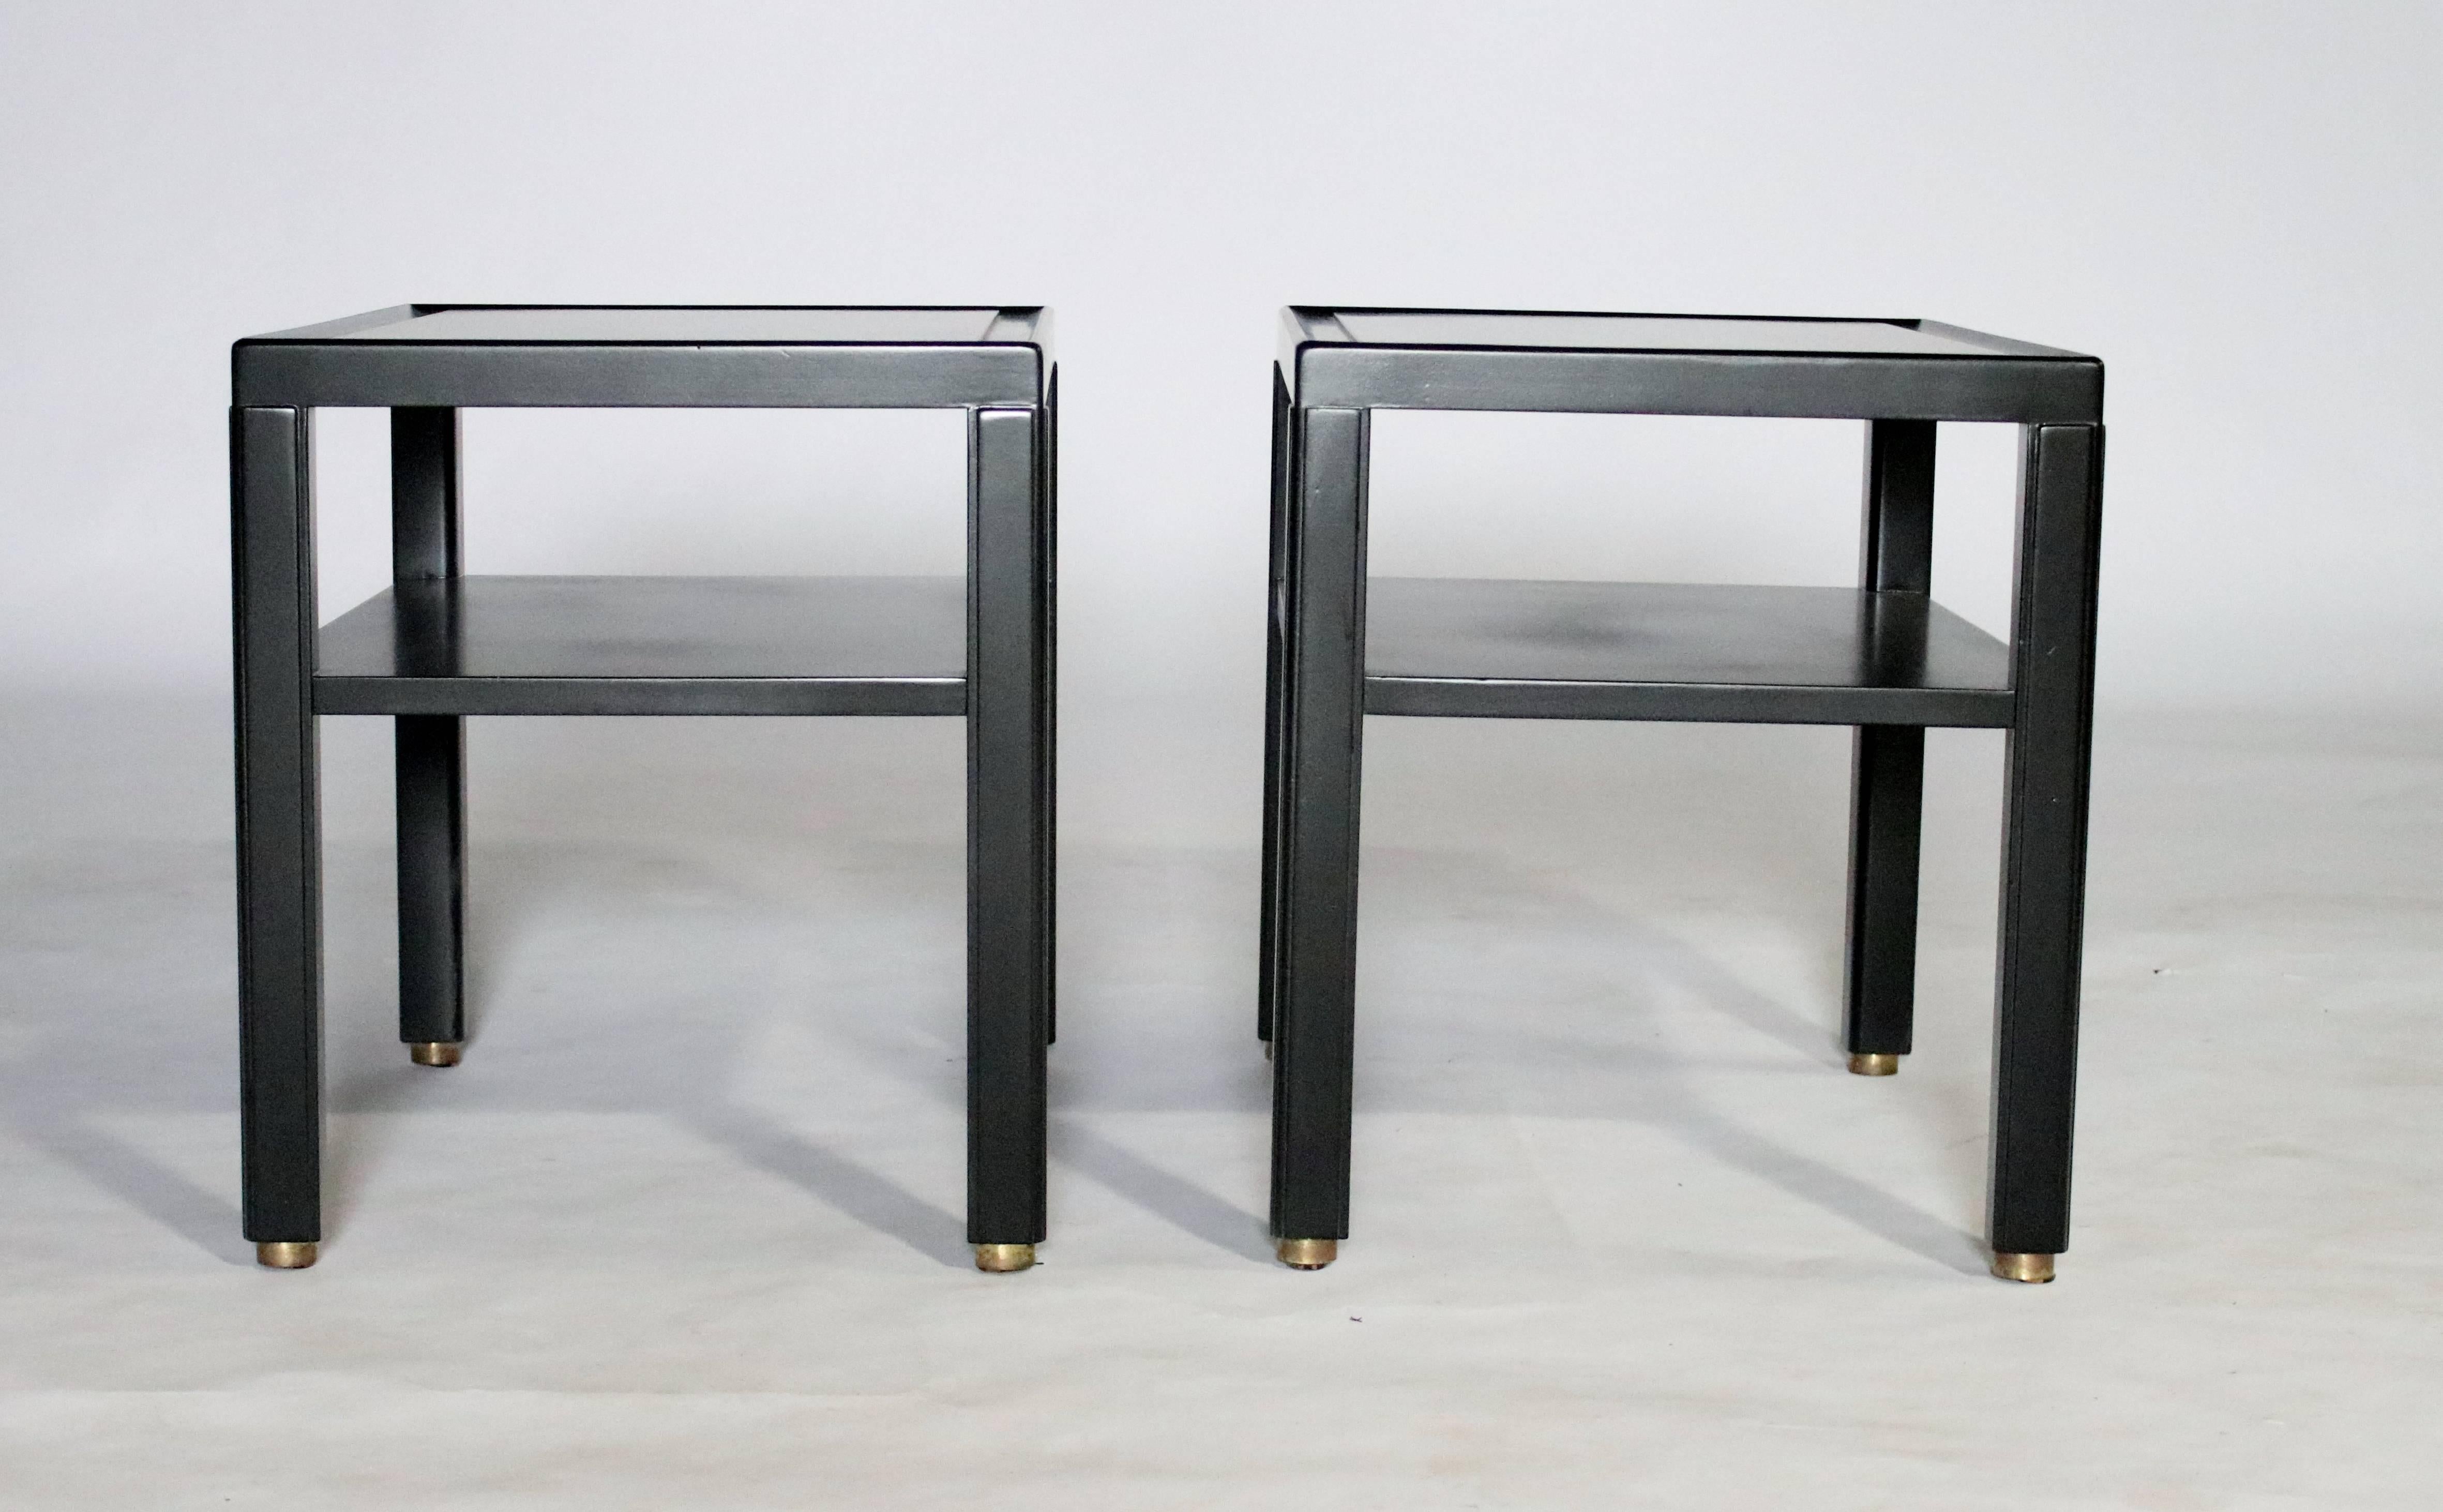 Pair of two-tiered, midcentury mahogany end tables by Edward Wormley for Dunbar newly lacquered in black satin with original brass feet and labels.